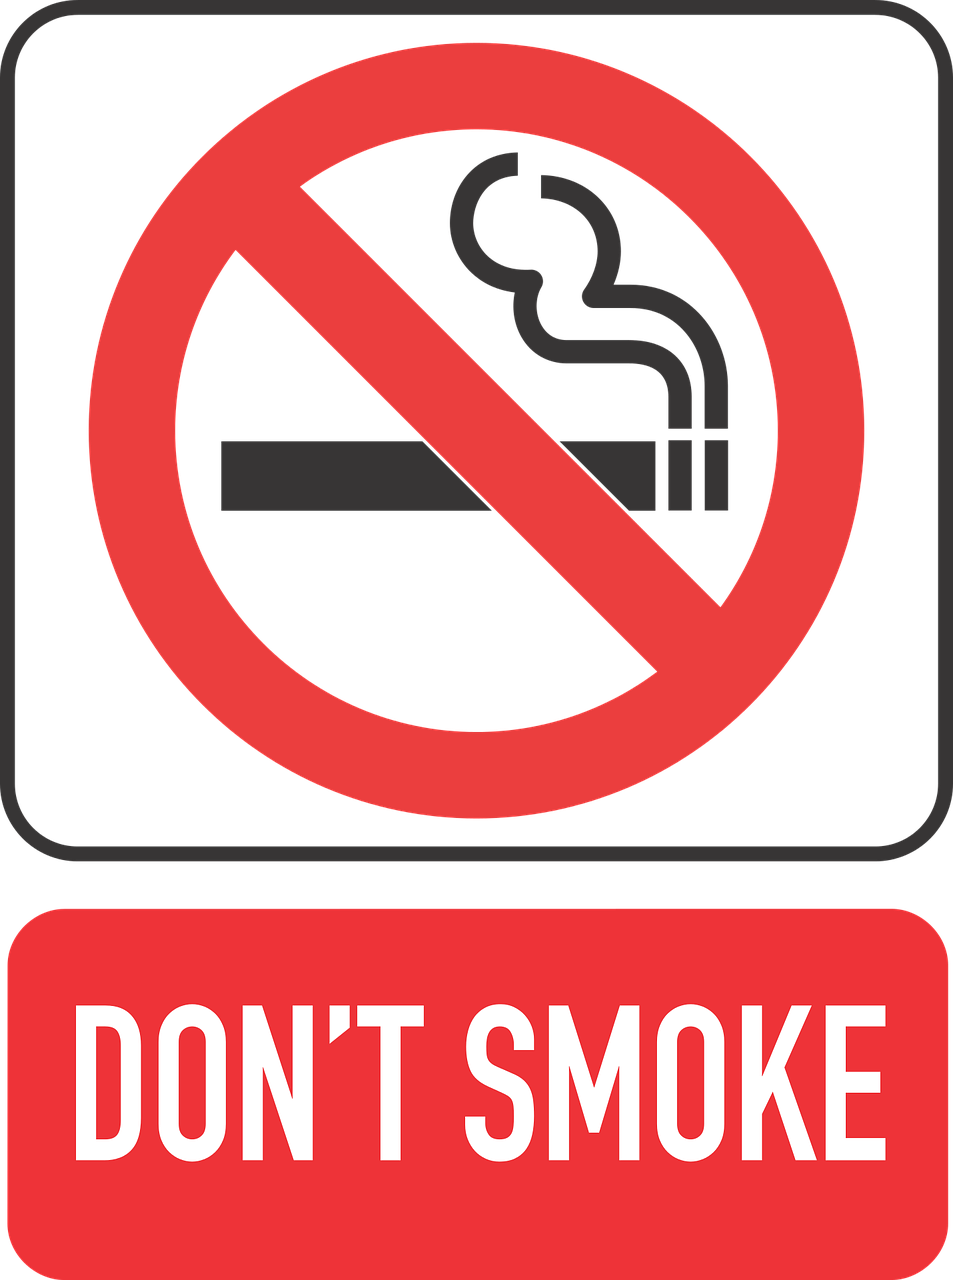 Sign that says "don't smoke"